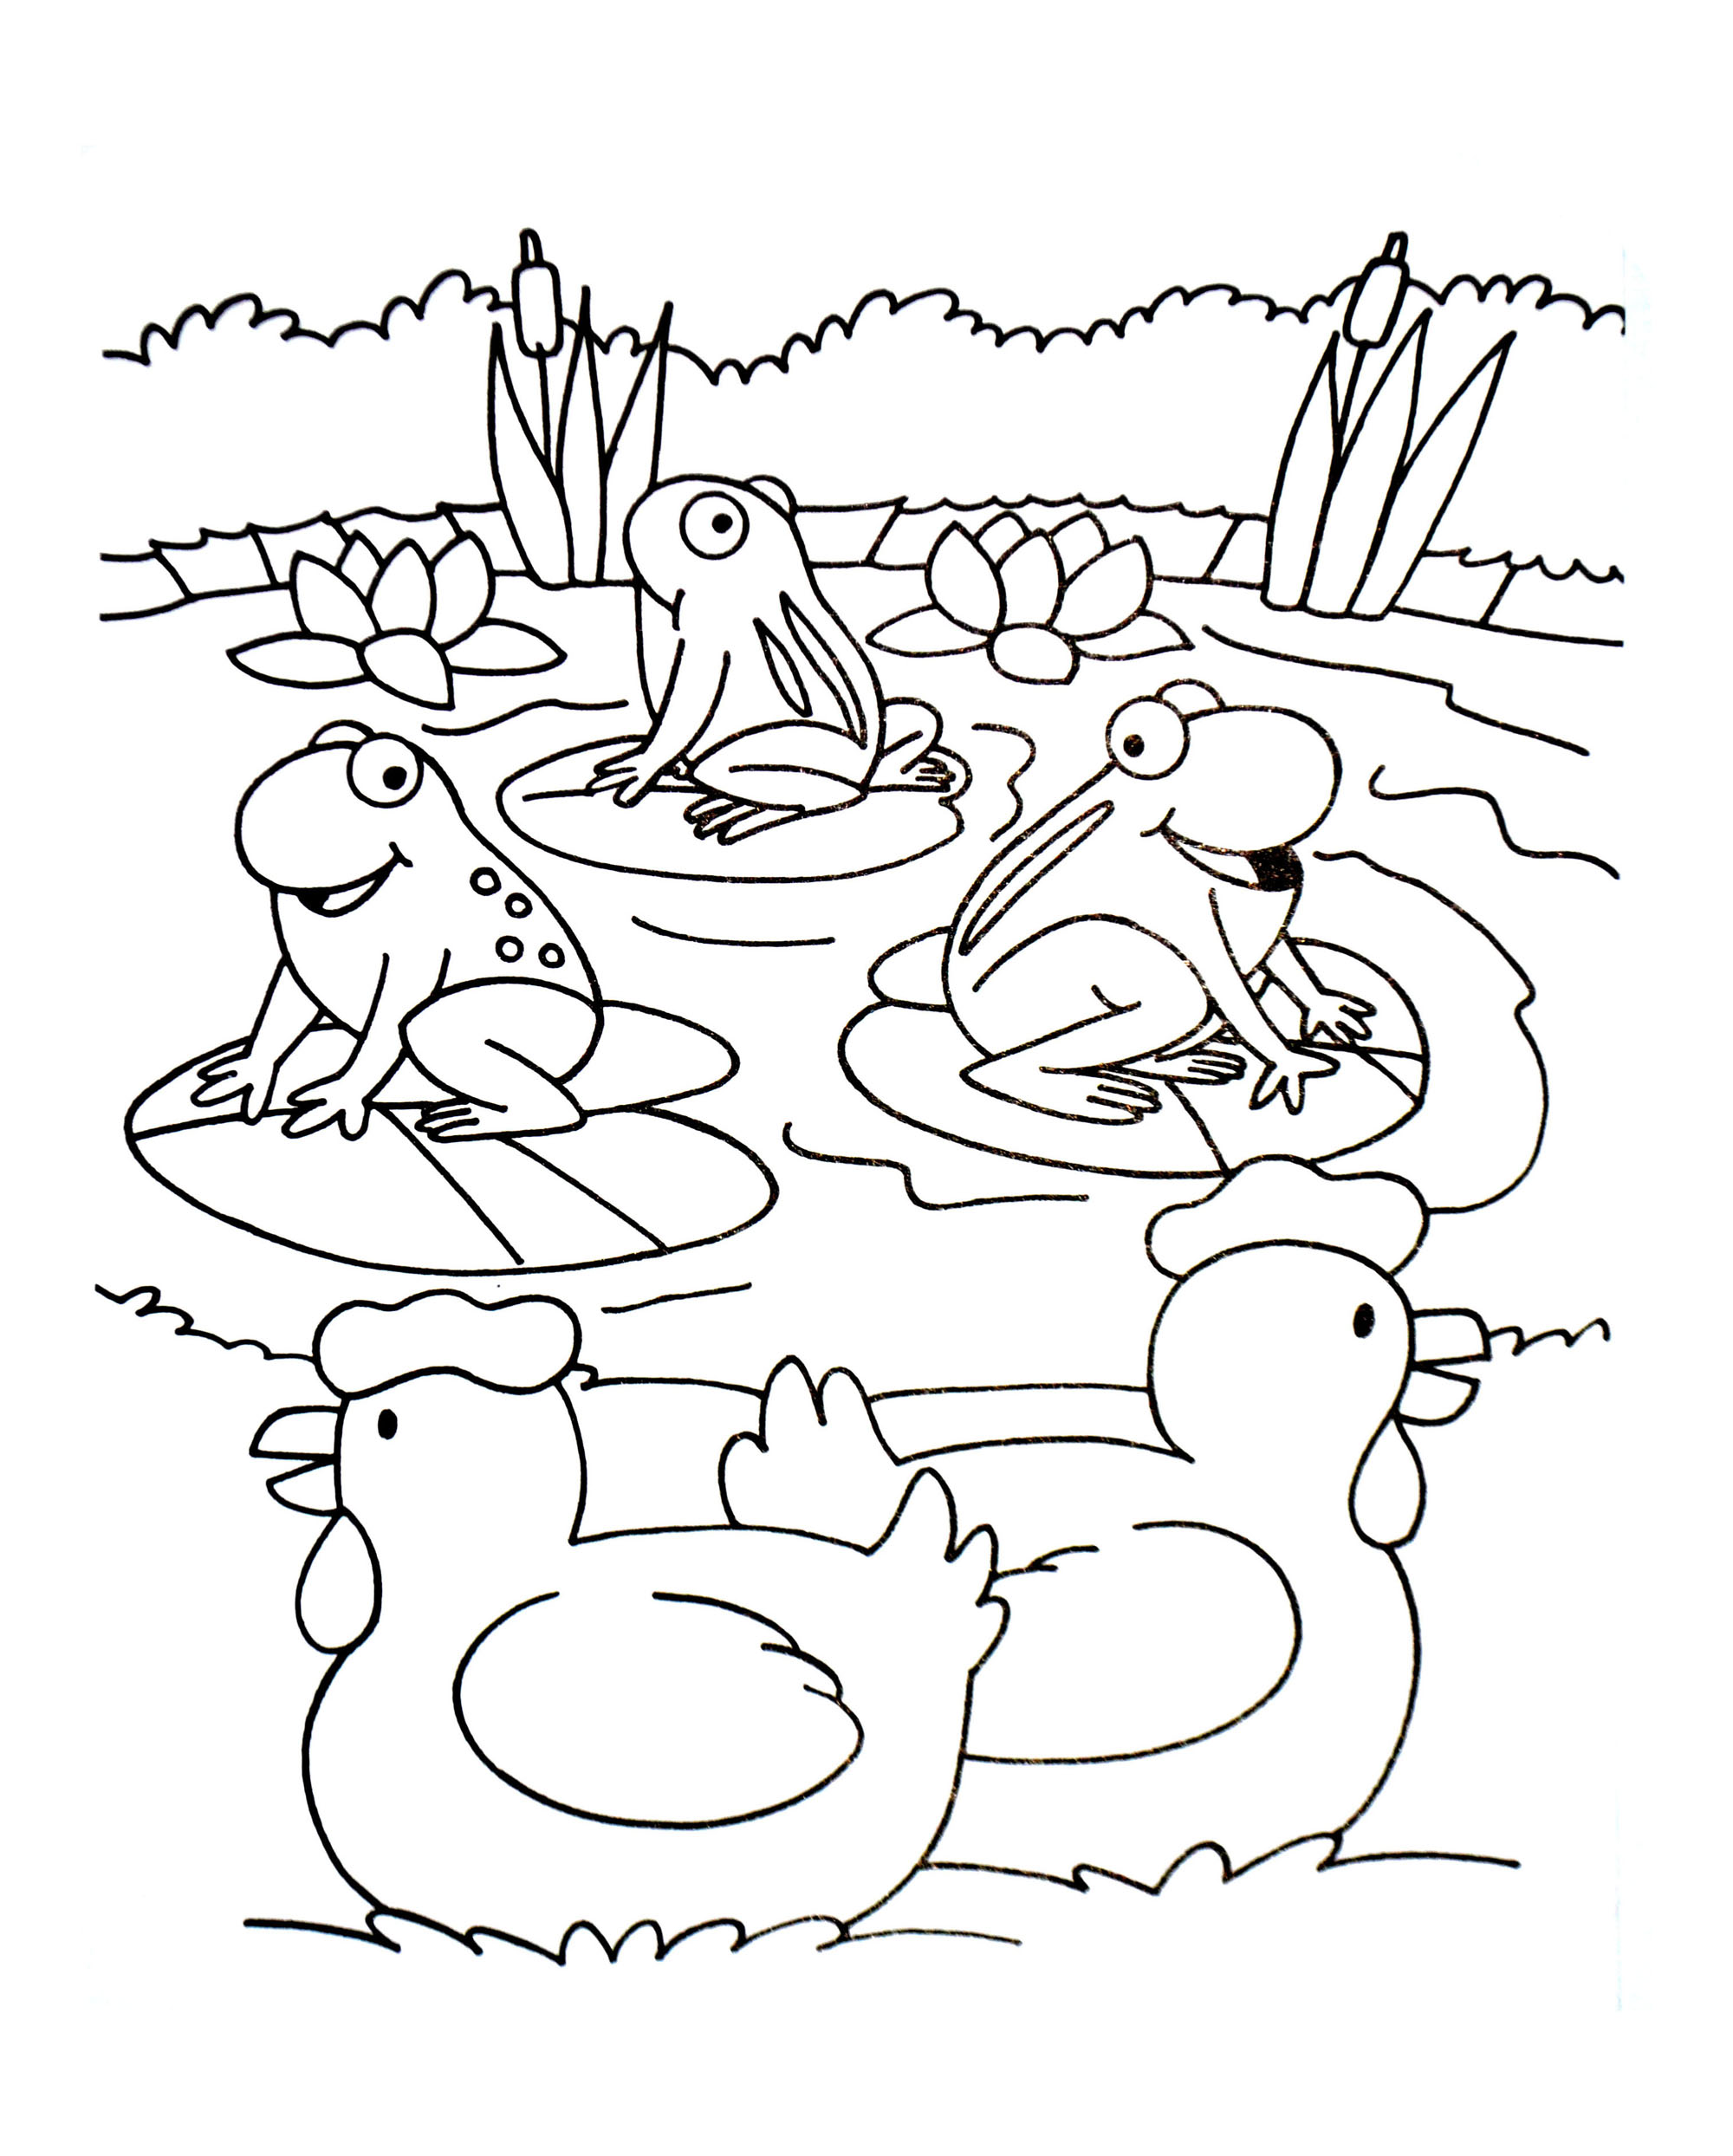 Farm free to color for kids - Farm Kids Coloring Pages